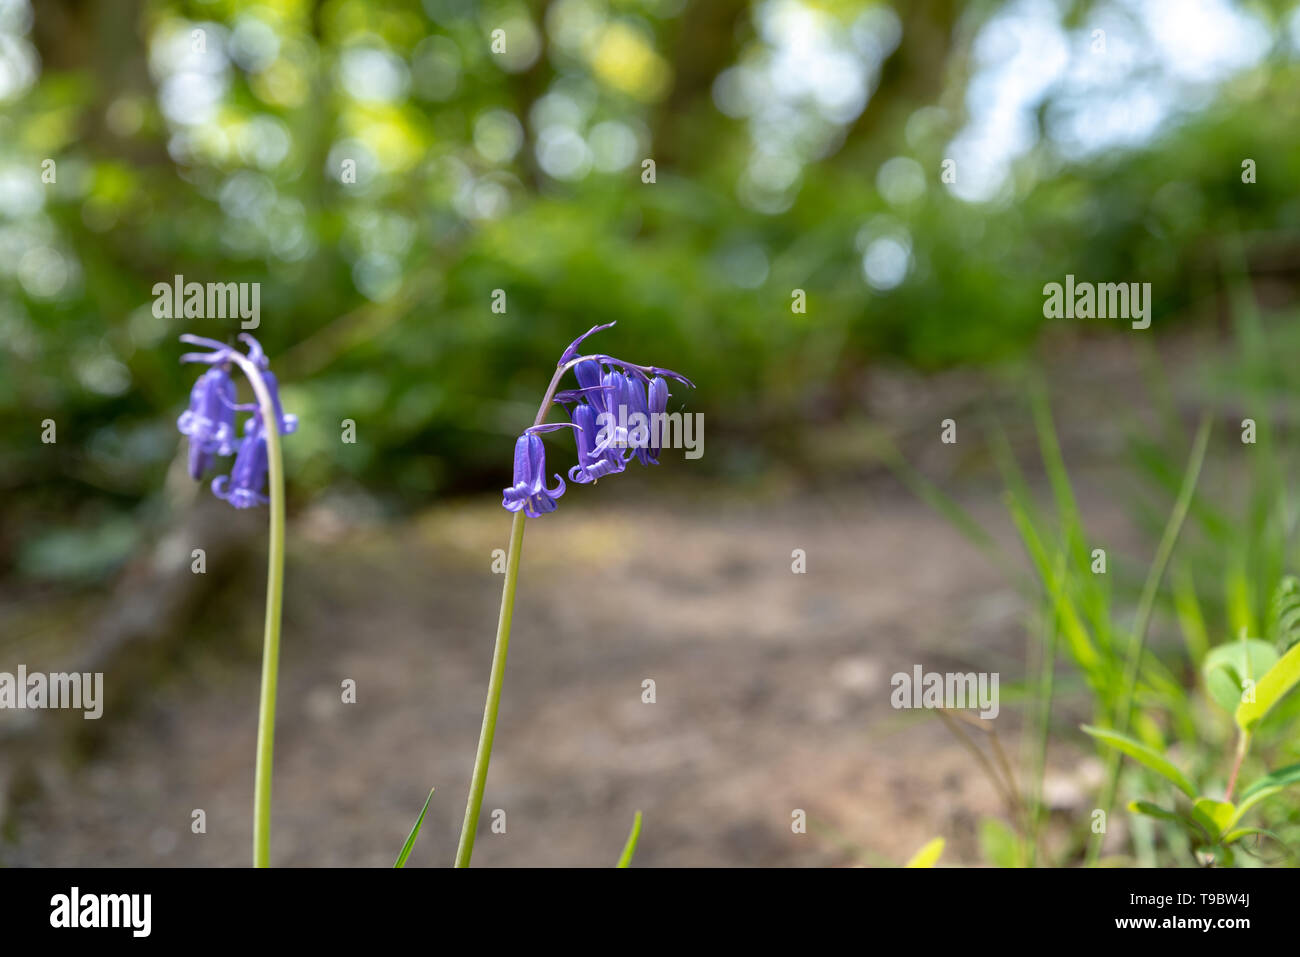 Brightly colored sunlit purple bluebell flowers against a natural green woodland background, using a shallow depth of field. Stock Photo